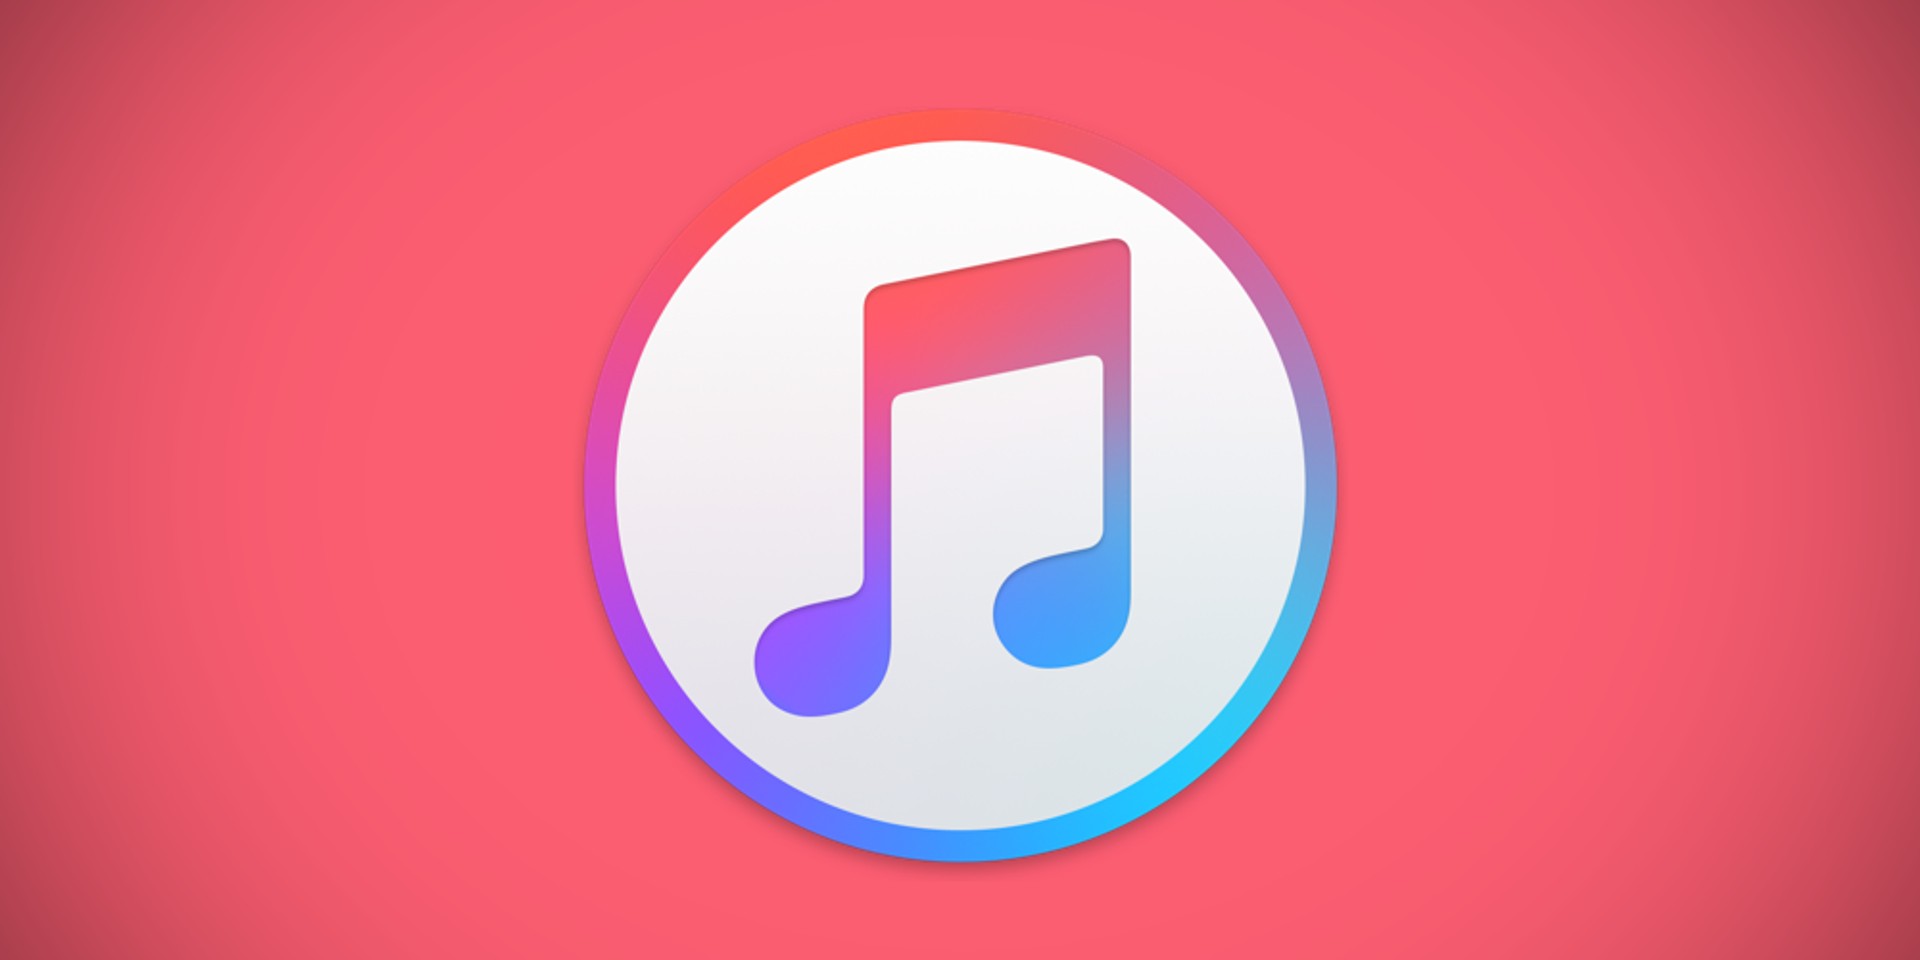 Apple to kill off iTunes after 18 years